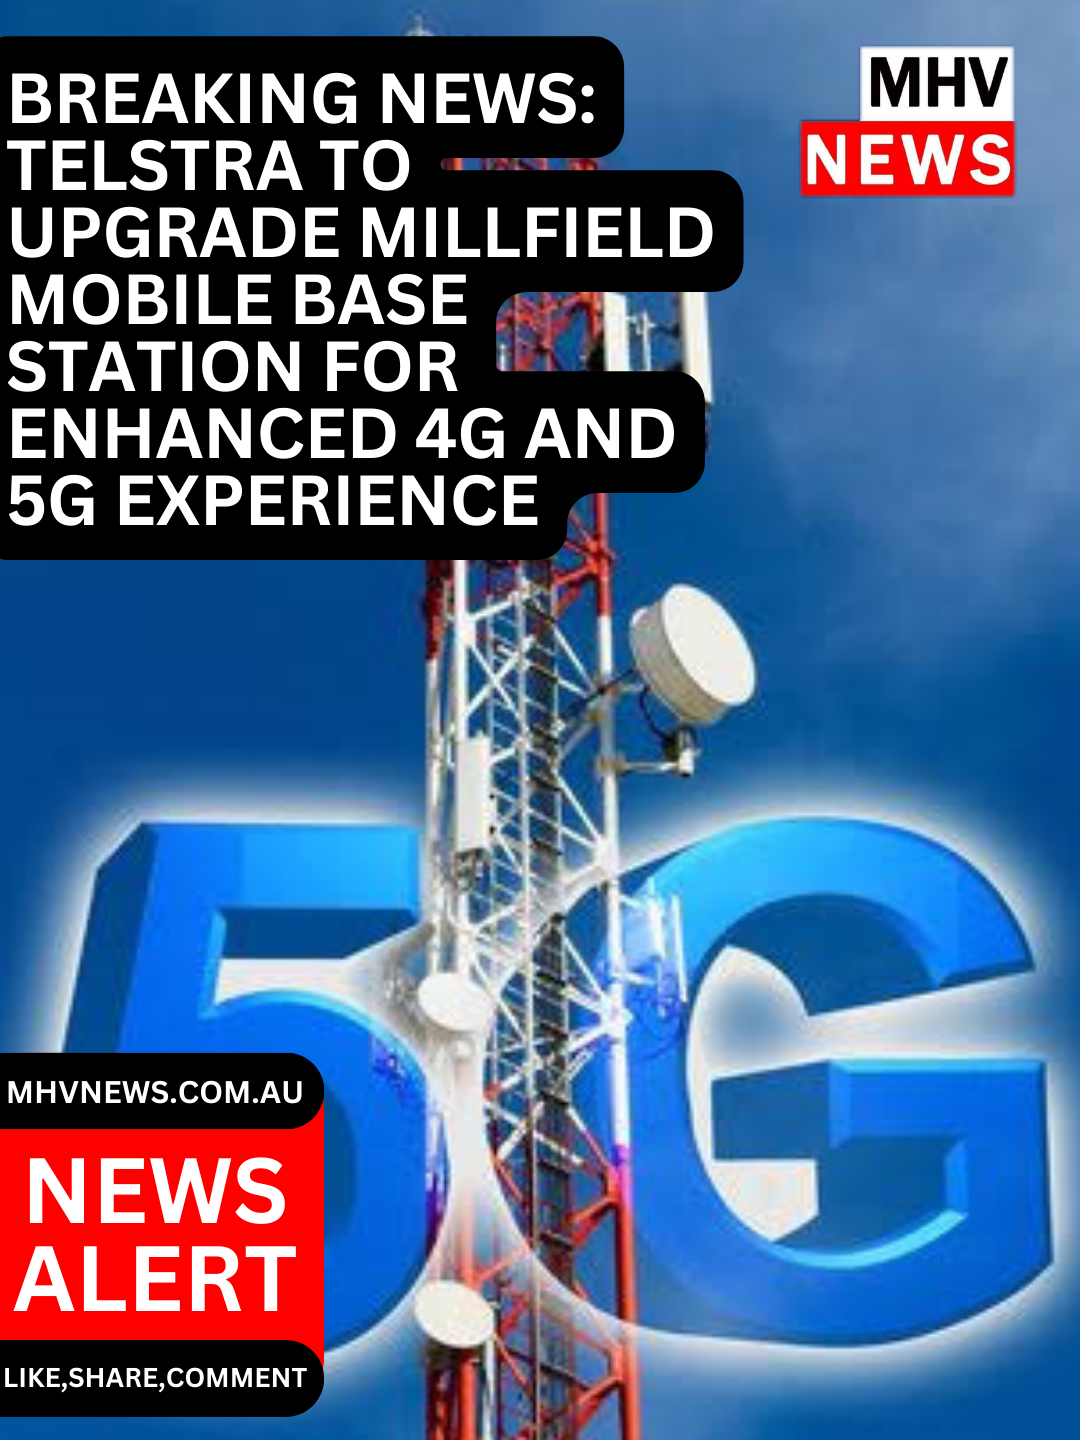 You are currently viewing Breaking News: Telstra to Upgrade Millfield Mobile Base Station for Enhanced 4G and 5G Experience